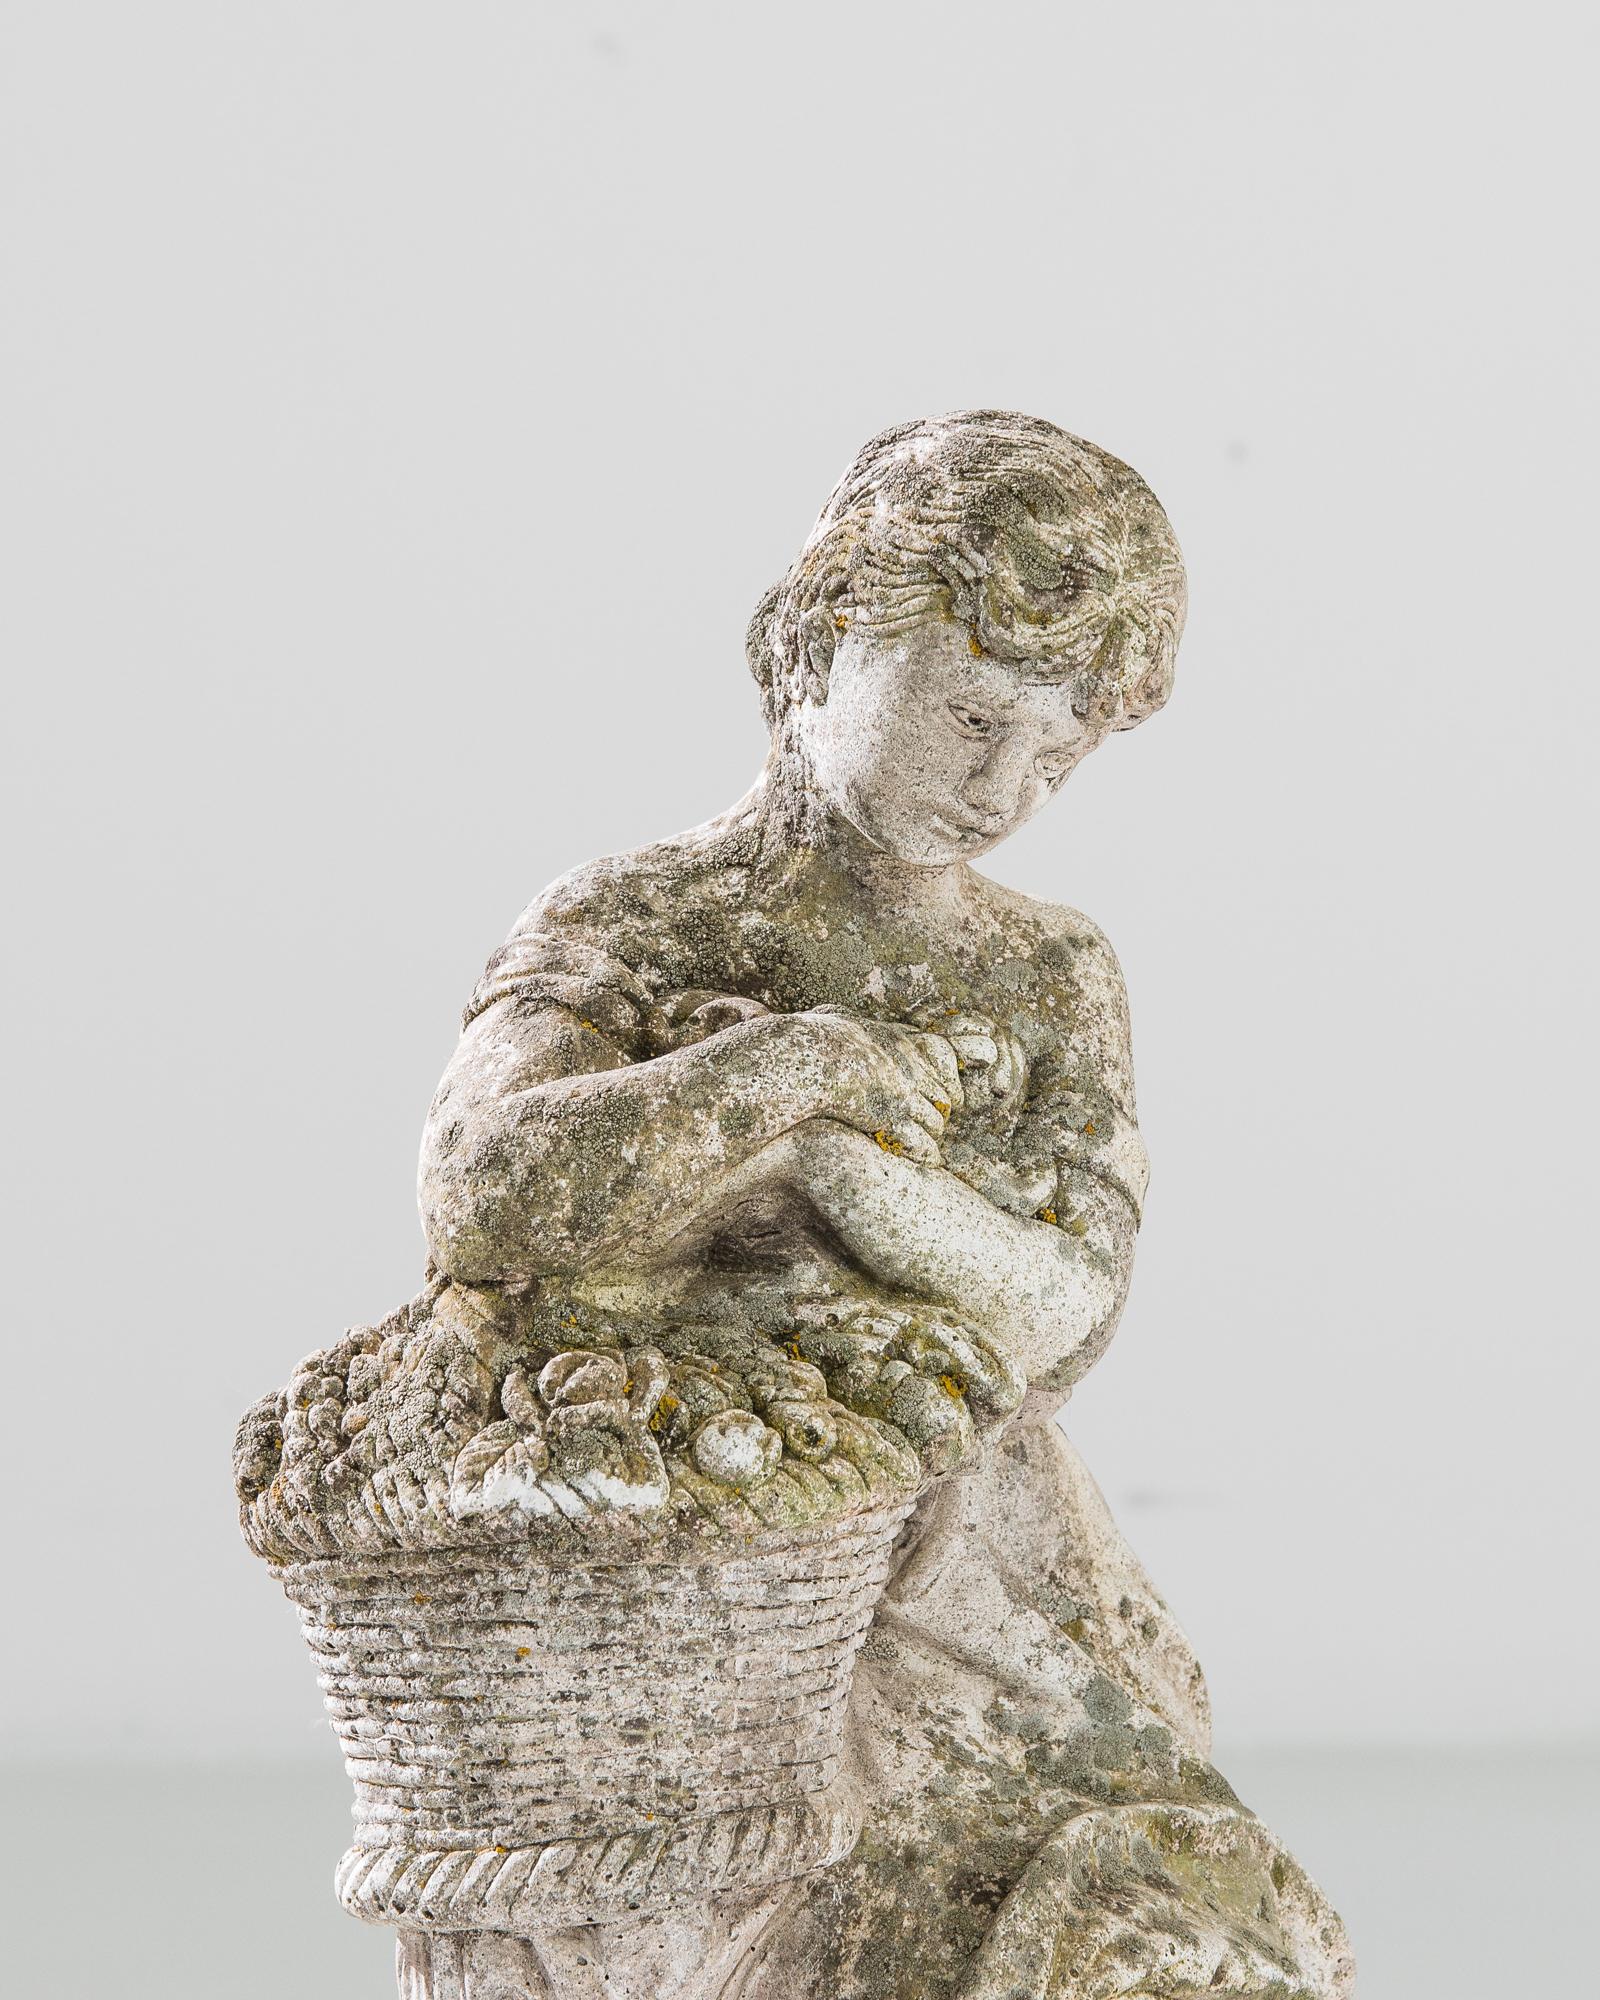 A concrete garden sculpture from France, produced circa 1960. Standing two feet tall on a circular base, this sculpture depicts a barefoot young woman wearing a dress and carrying a basket of fresh produce as she rests on a stump. Arms crossed,